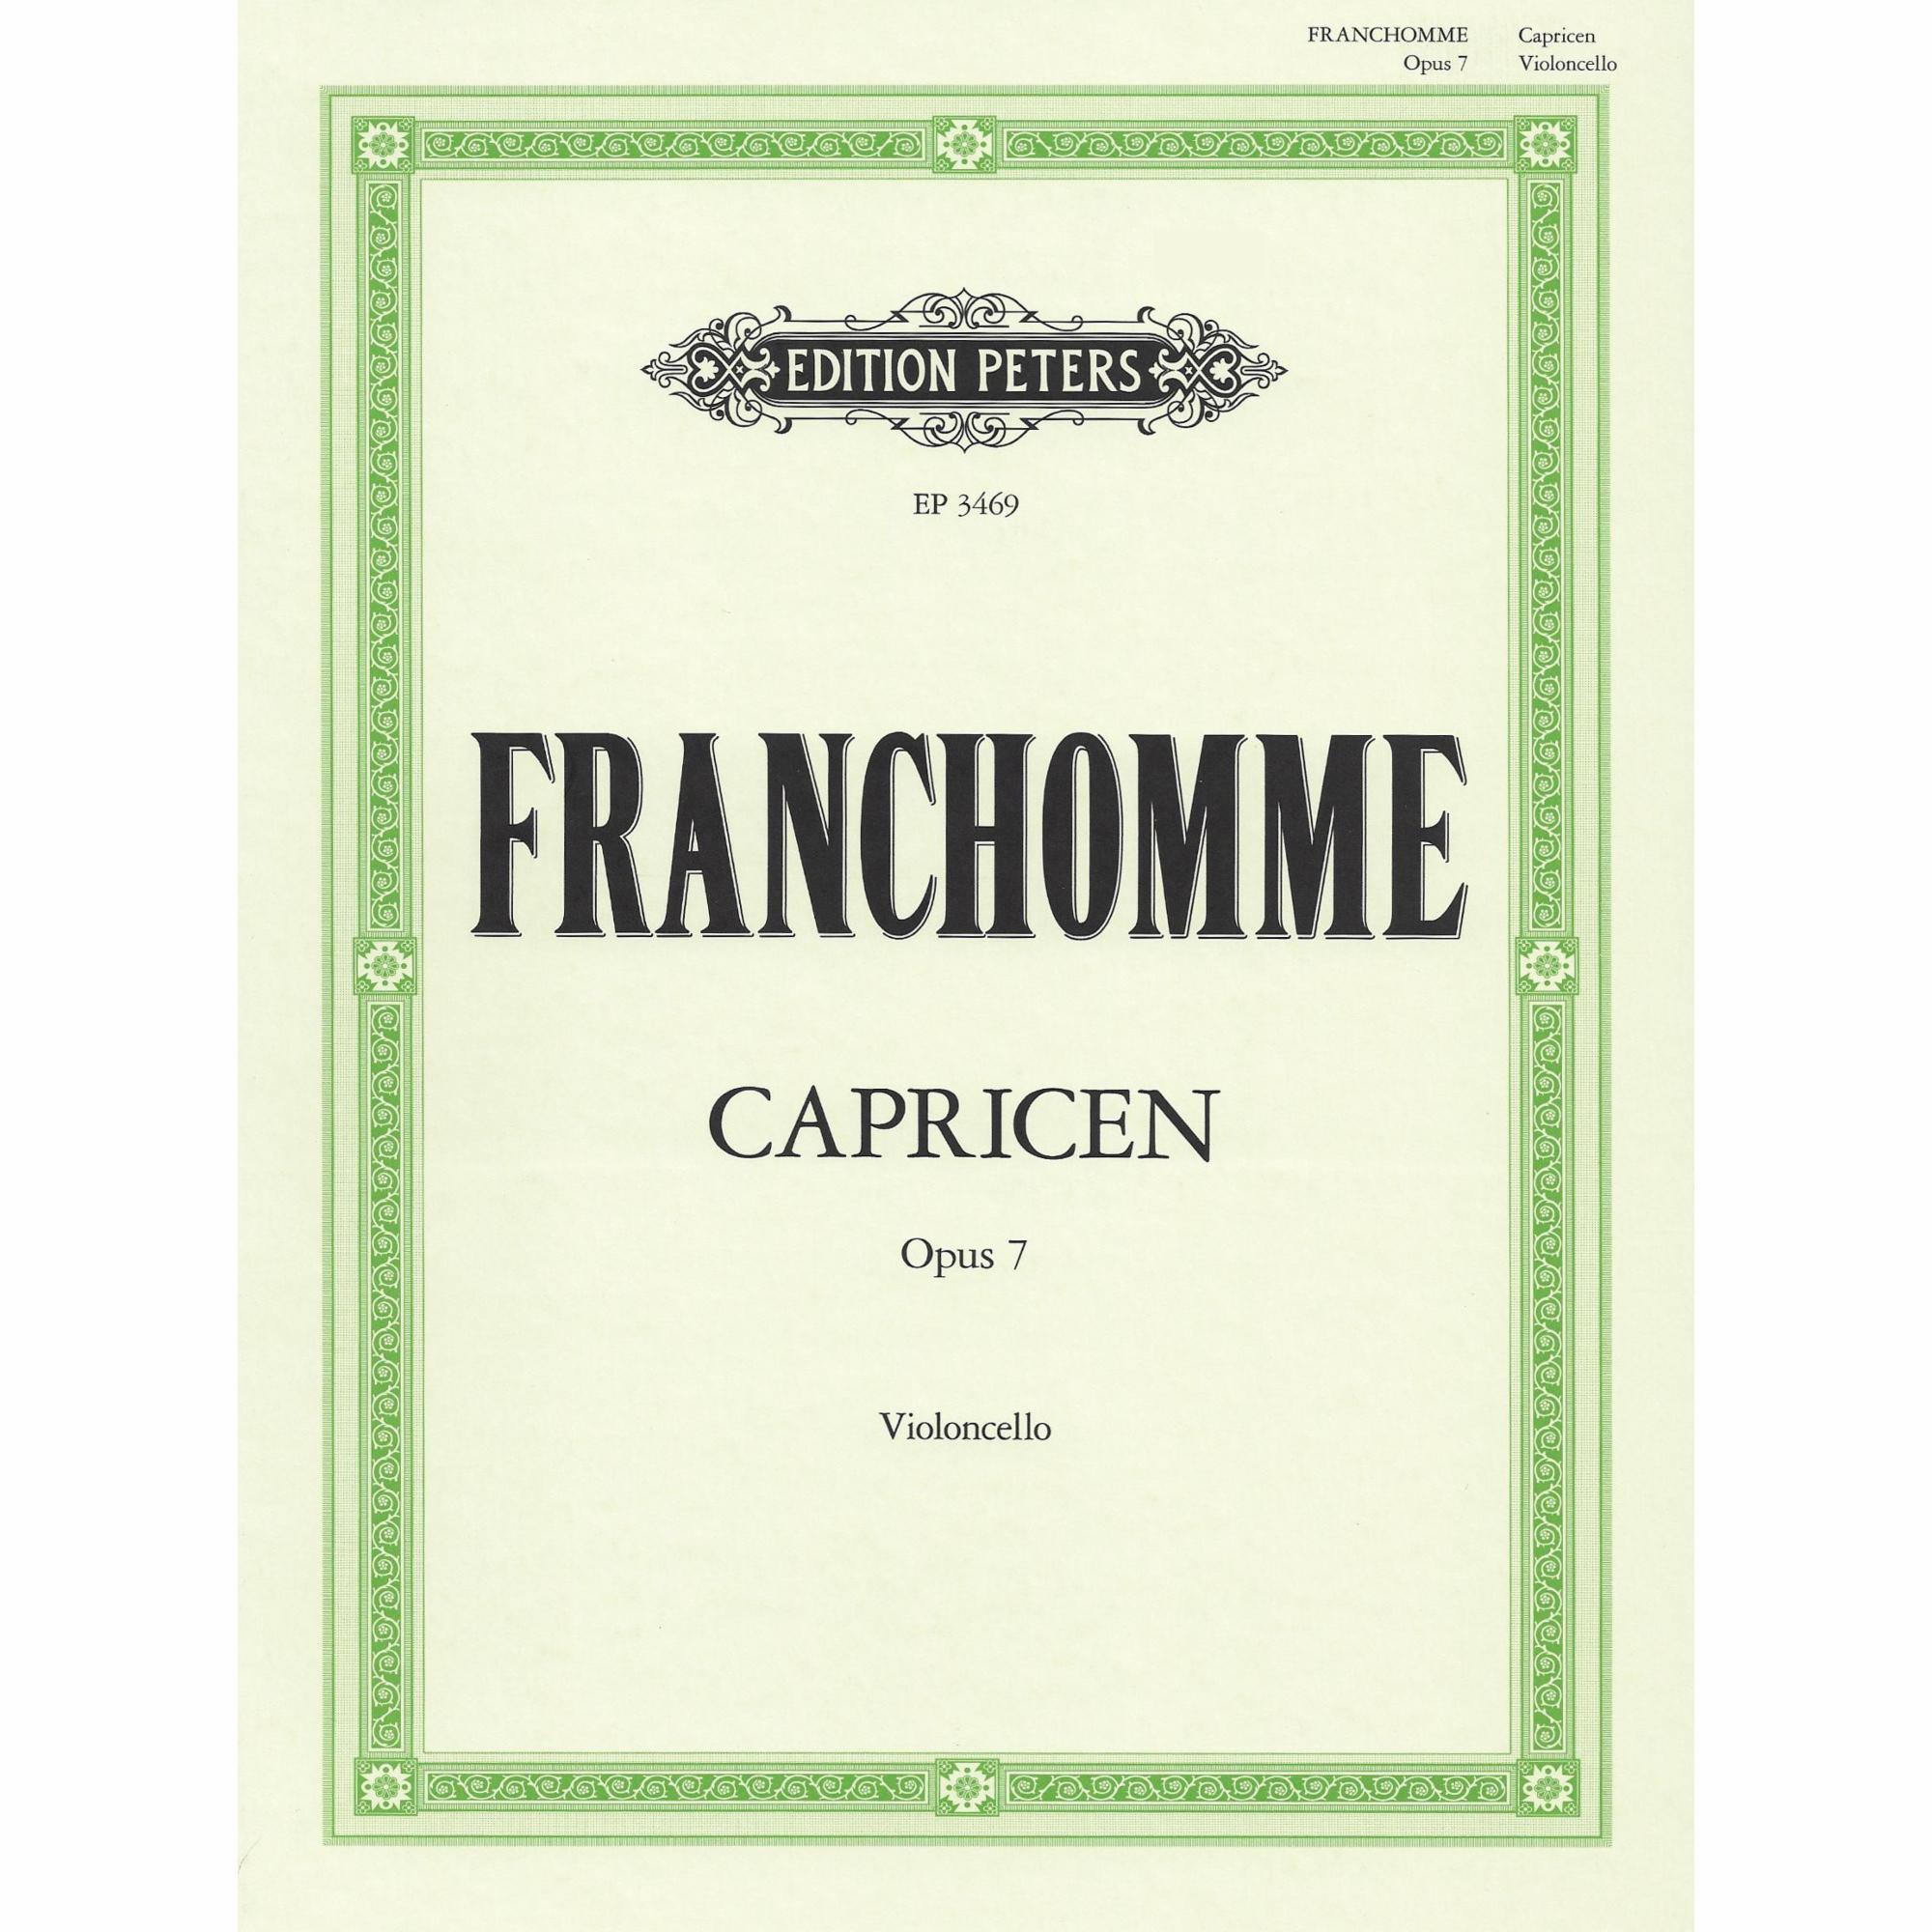 Franchomme -- 12 Caprices, Op. 7 for Cello